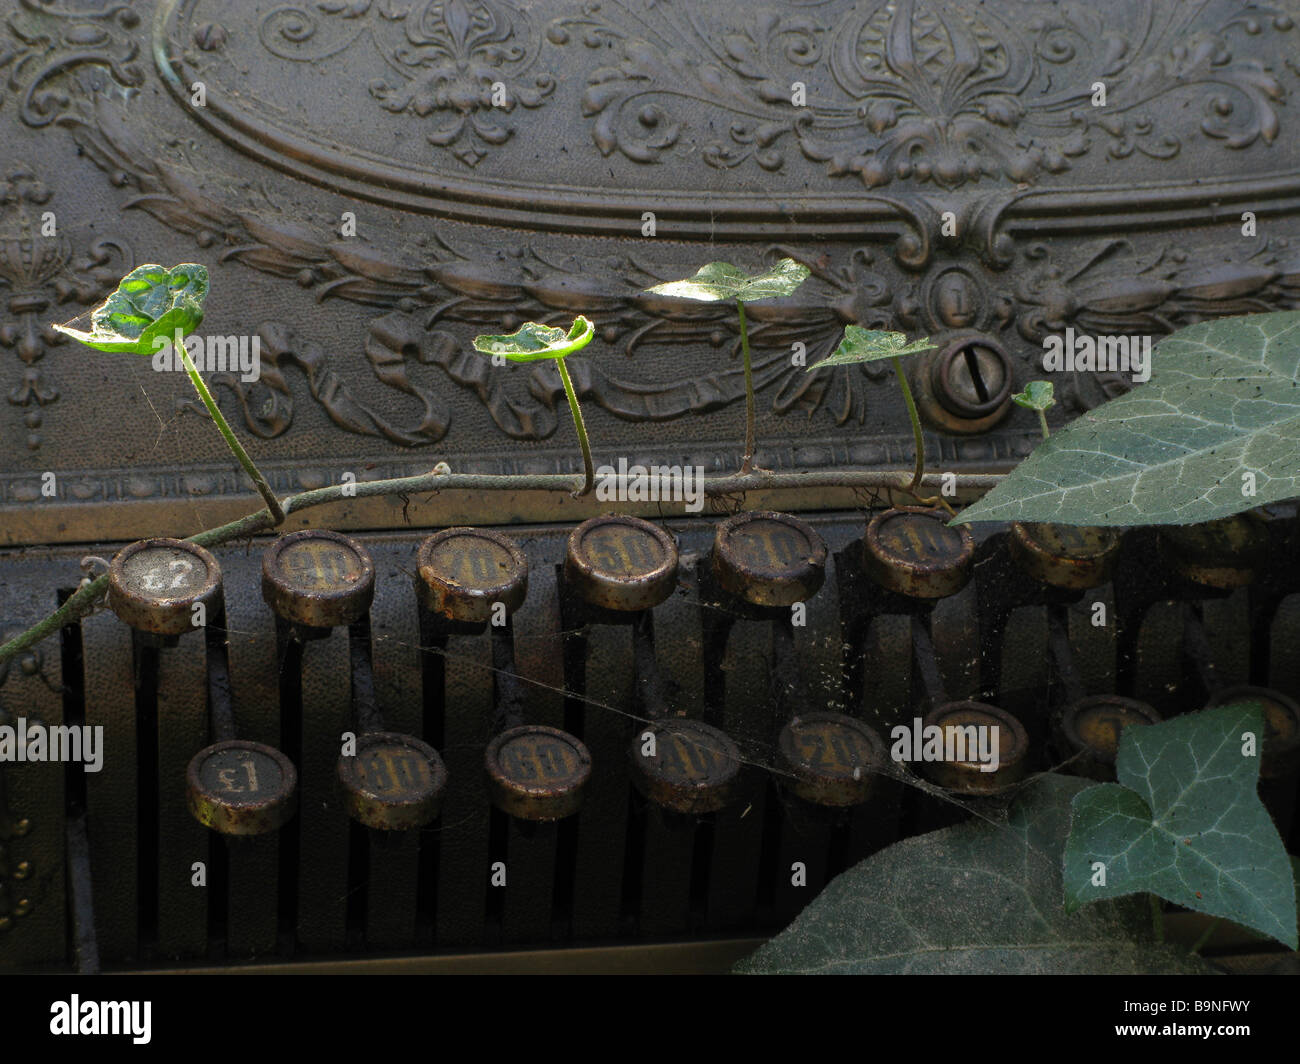 Shoots of ivy creep across the keys of an old brass shop till - cash register - among junk in a shed Stock Photo